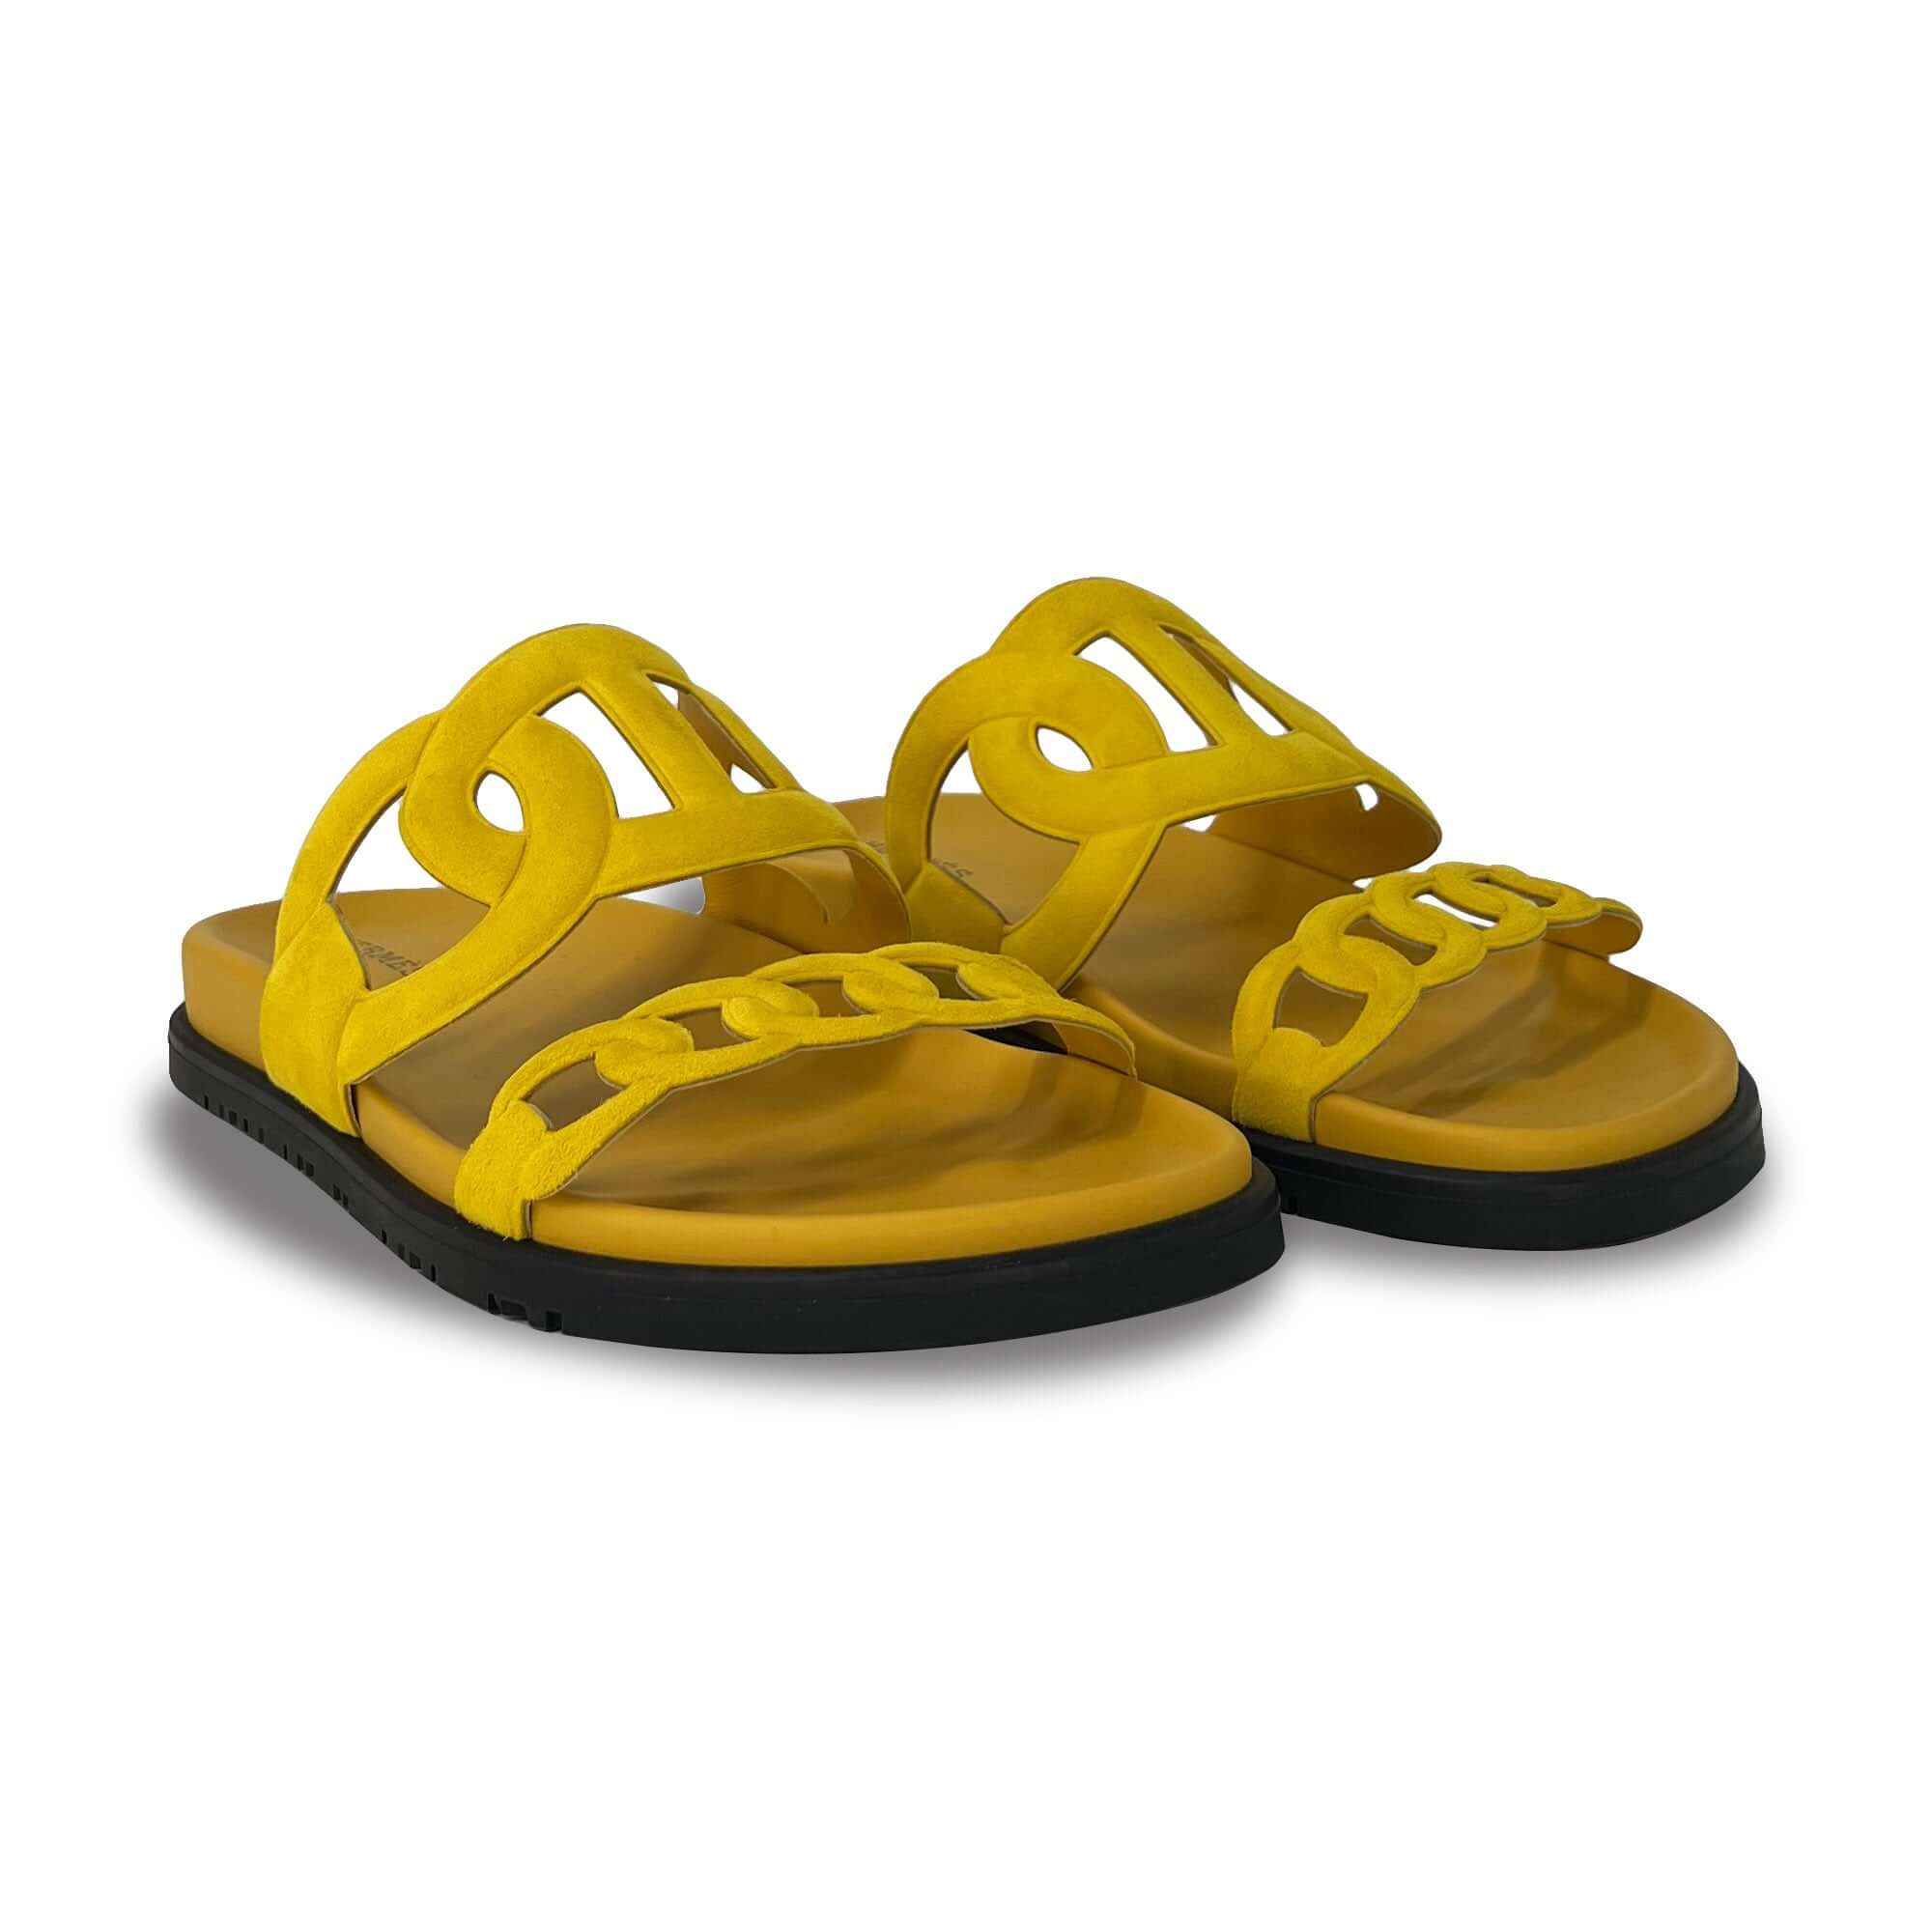 Hermes Extra Designer Sandals in yellow angle